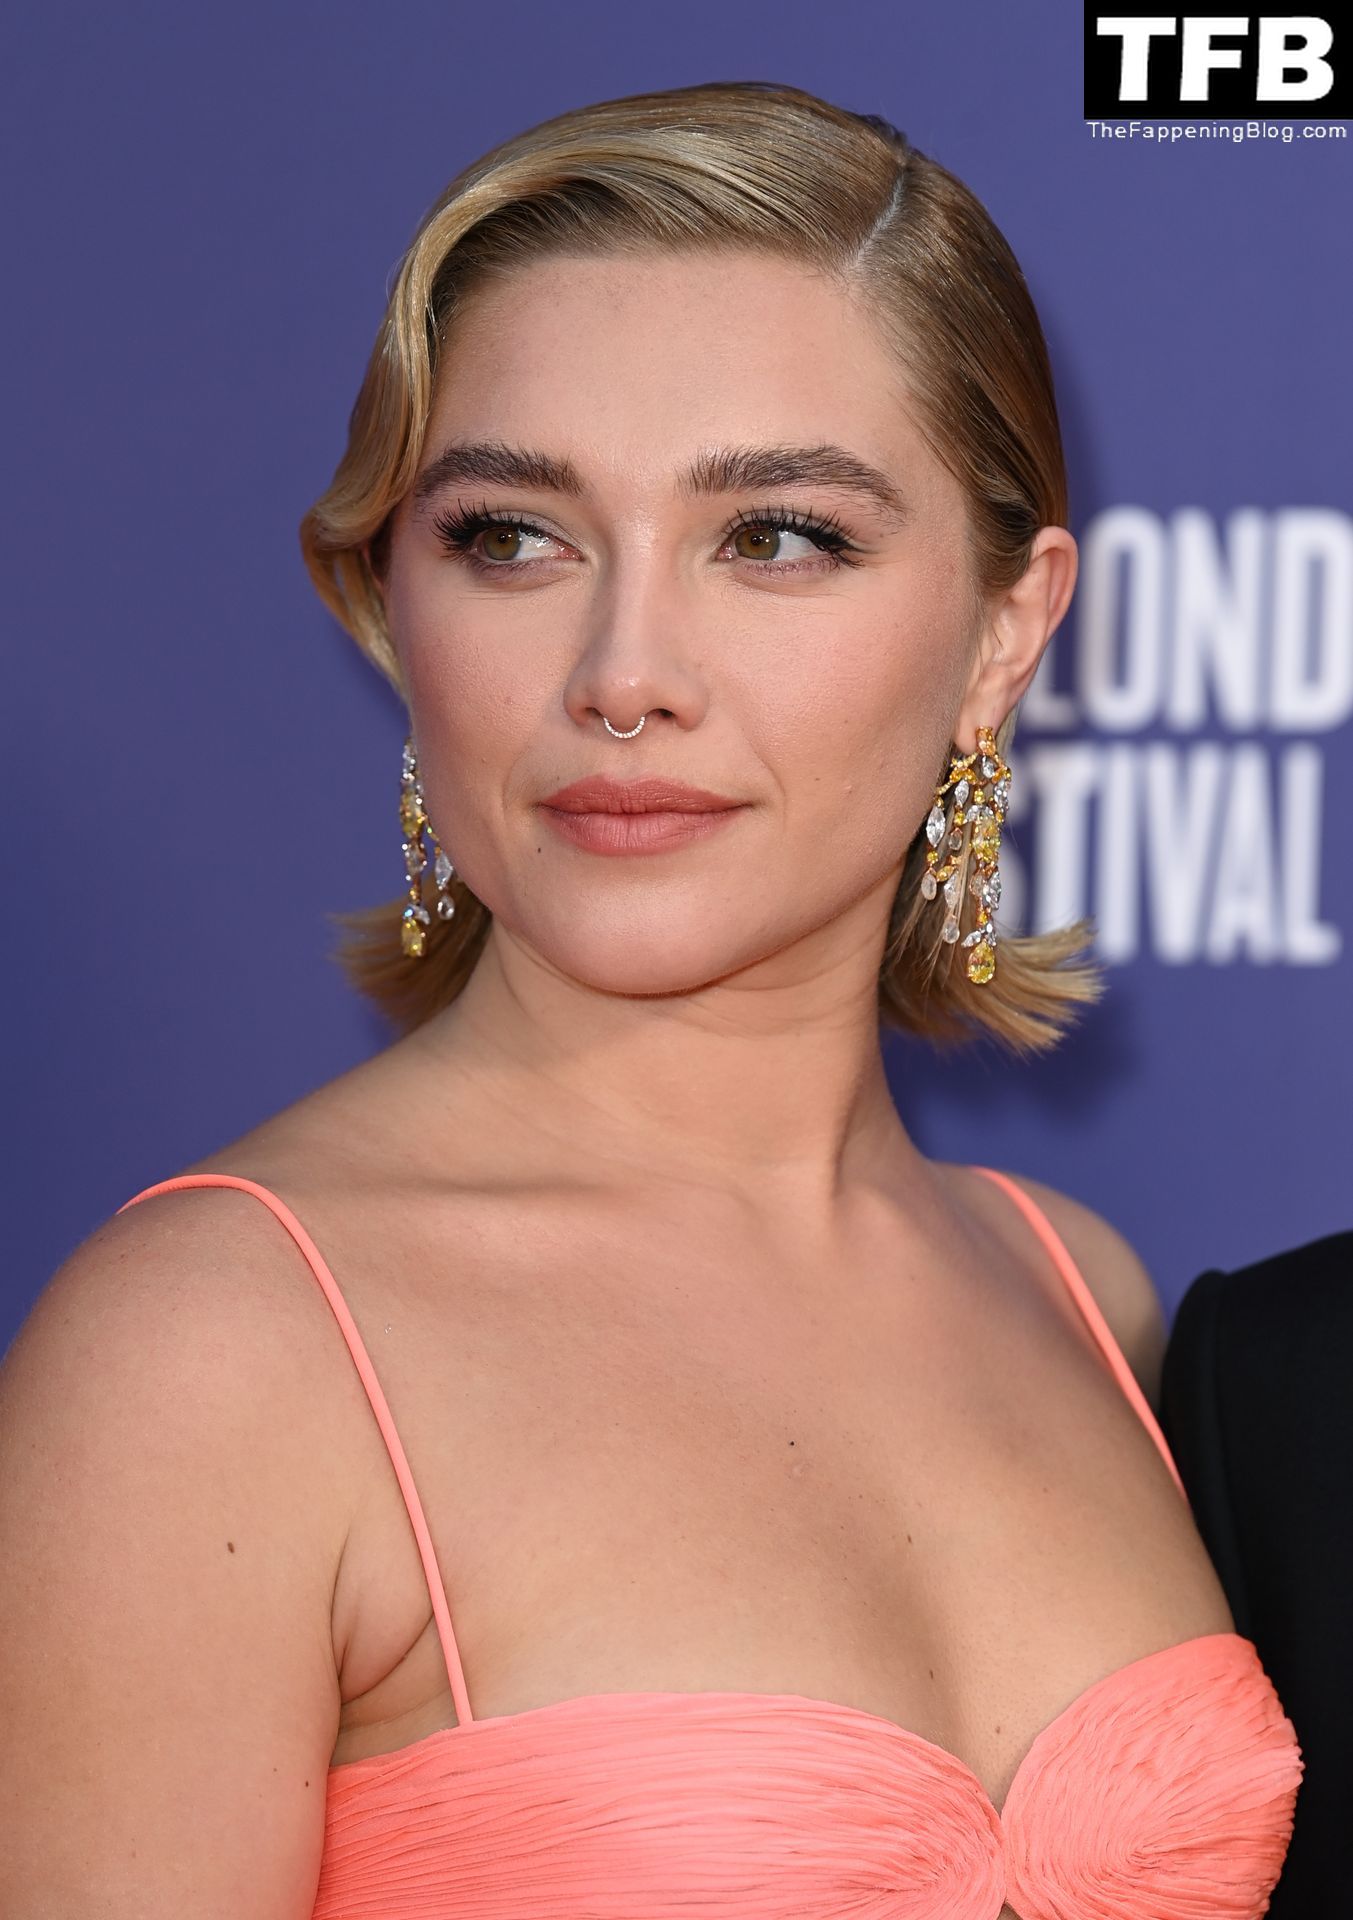 Florence-Pugh-Sexy-The-Fappening-Blog-48-1.jpg